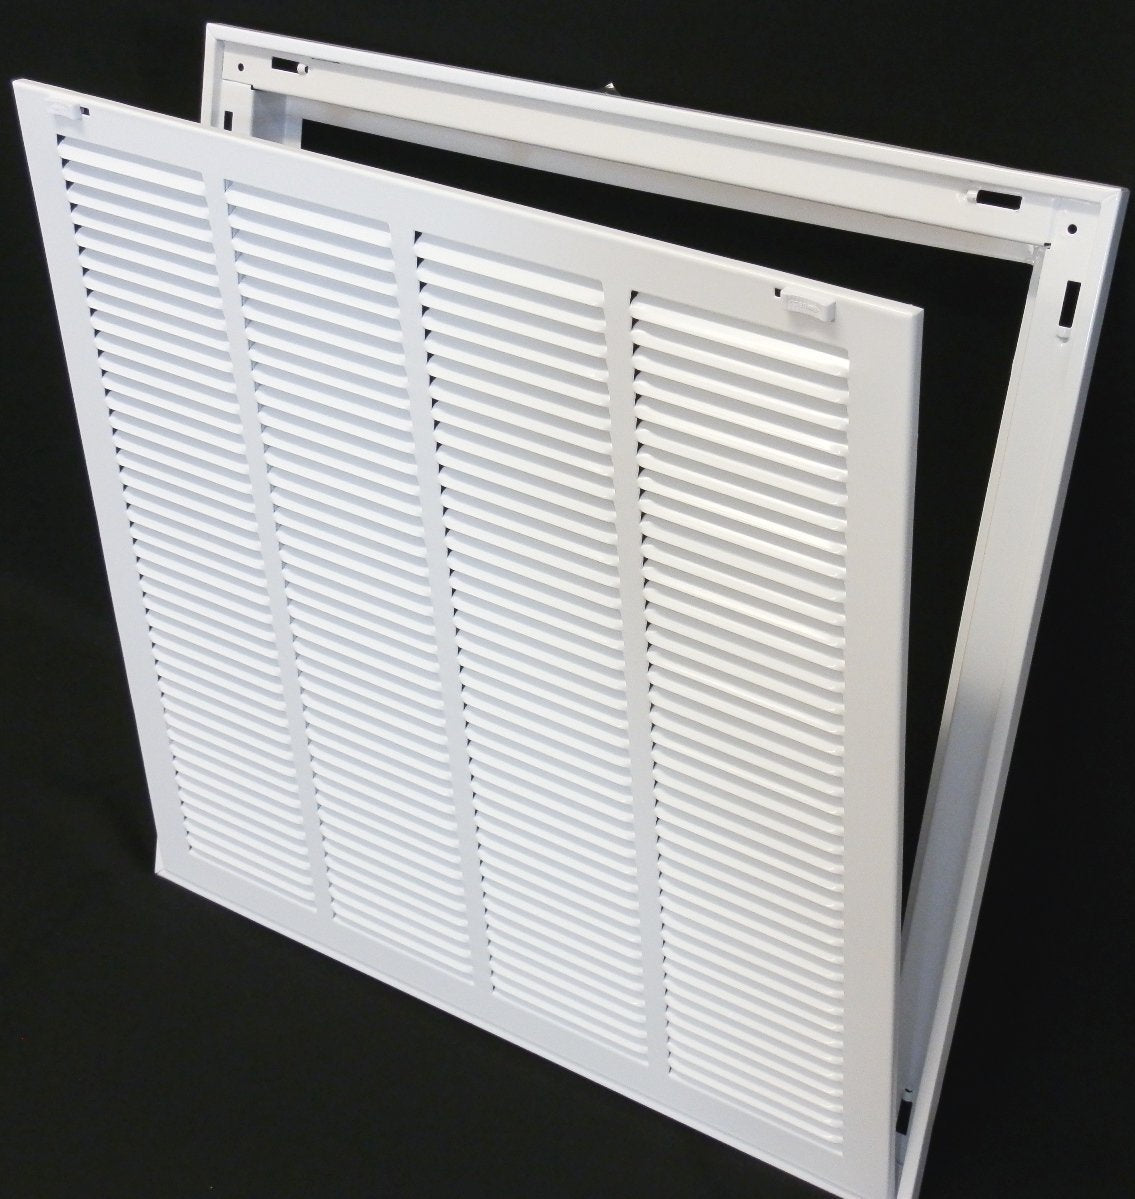 36&quot; X 26&quot; Steel Return Air Filter Grille for 1&quot; Filter - Removable Frame - [Outer Dimensions: 38 5/8&quot; X 28 5/8&quot;]